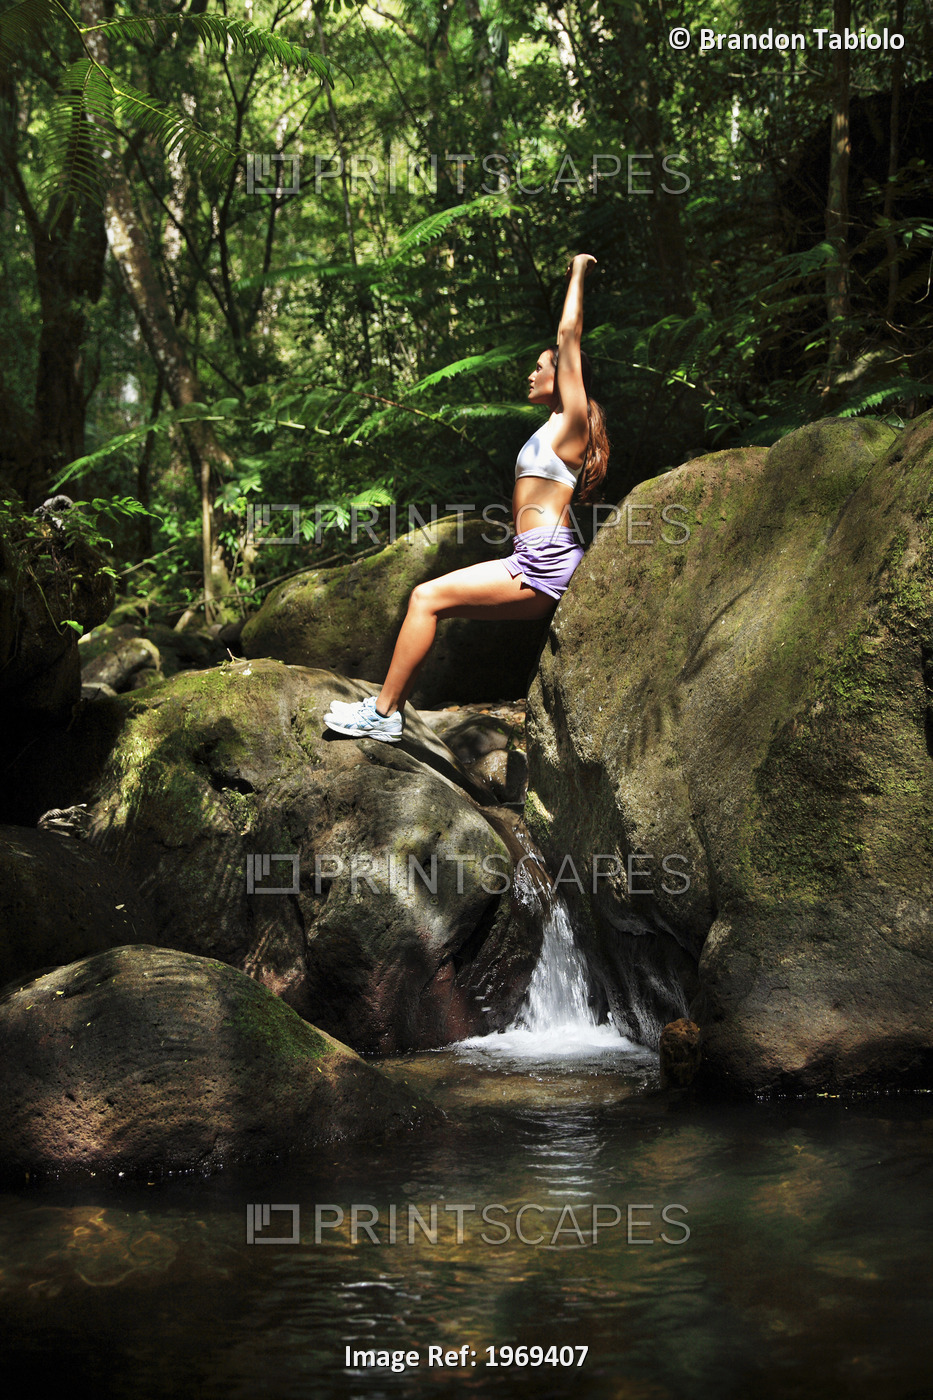 Hawaii, Oahu, Young Female Doing Yoga In A Lush Forest With Waterfall Below Her.